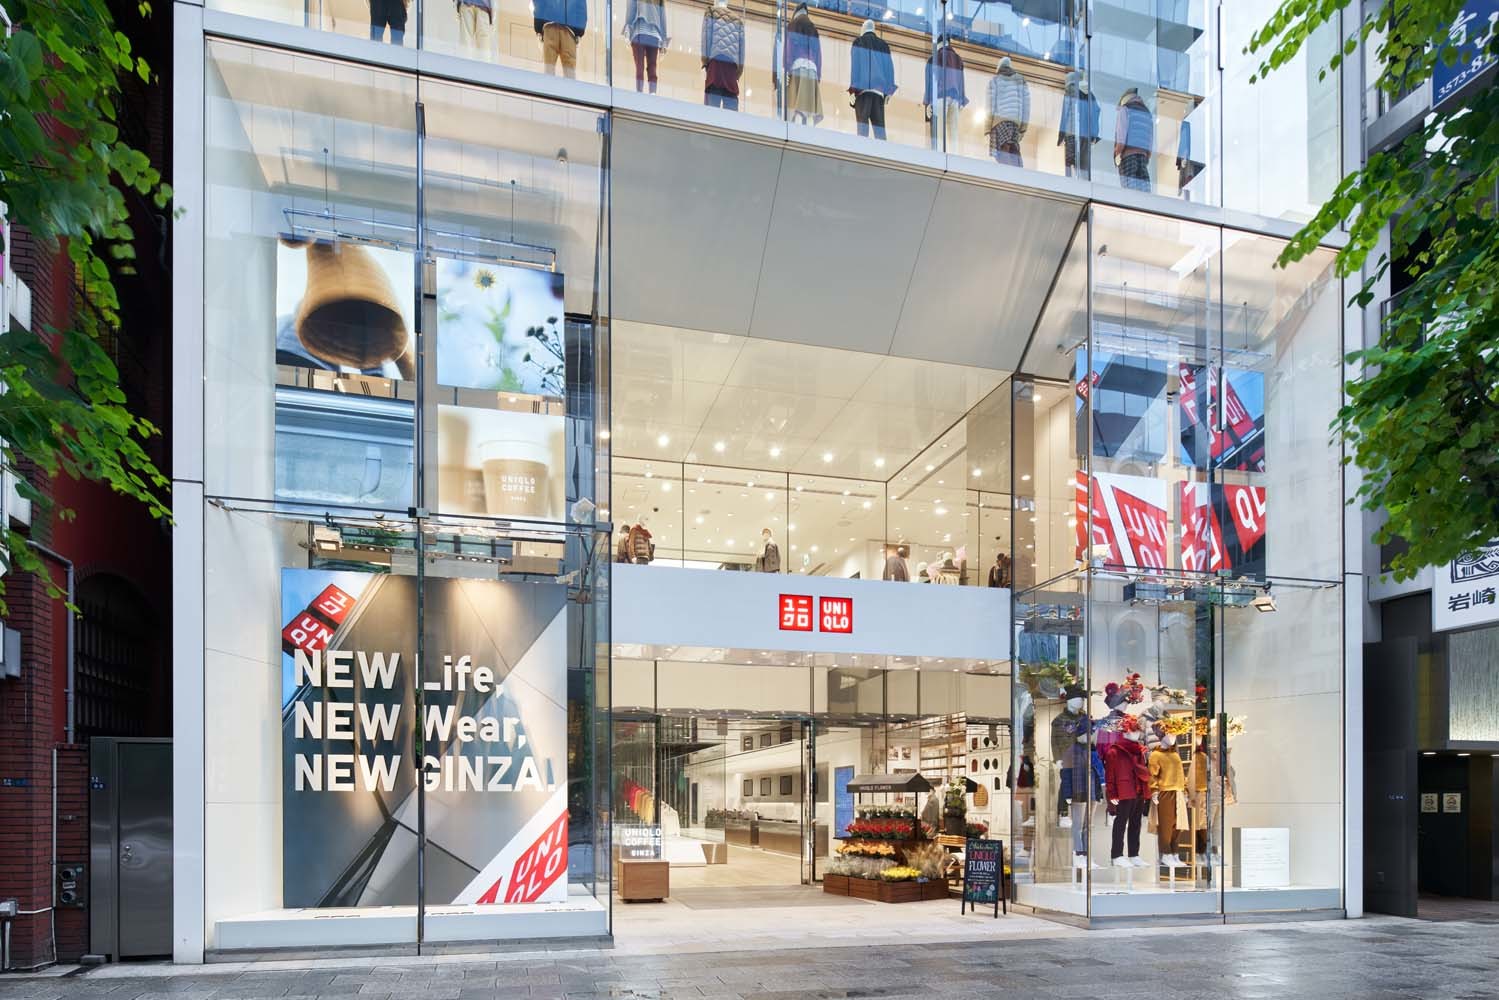 Uniqlo in Sydney 197 Pitt St Mall store info and specials